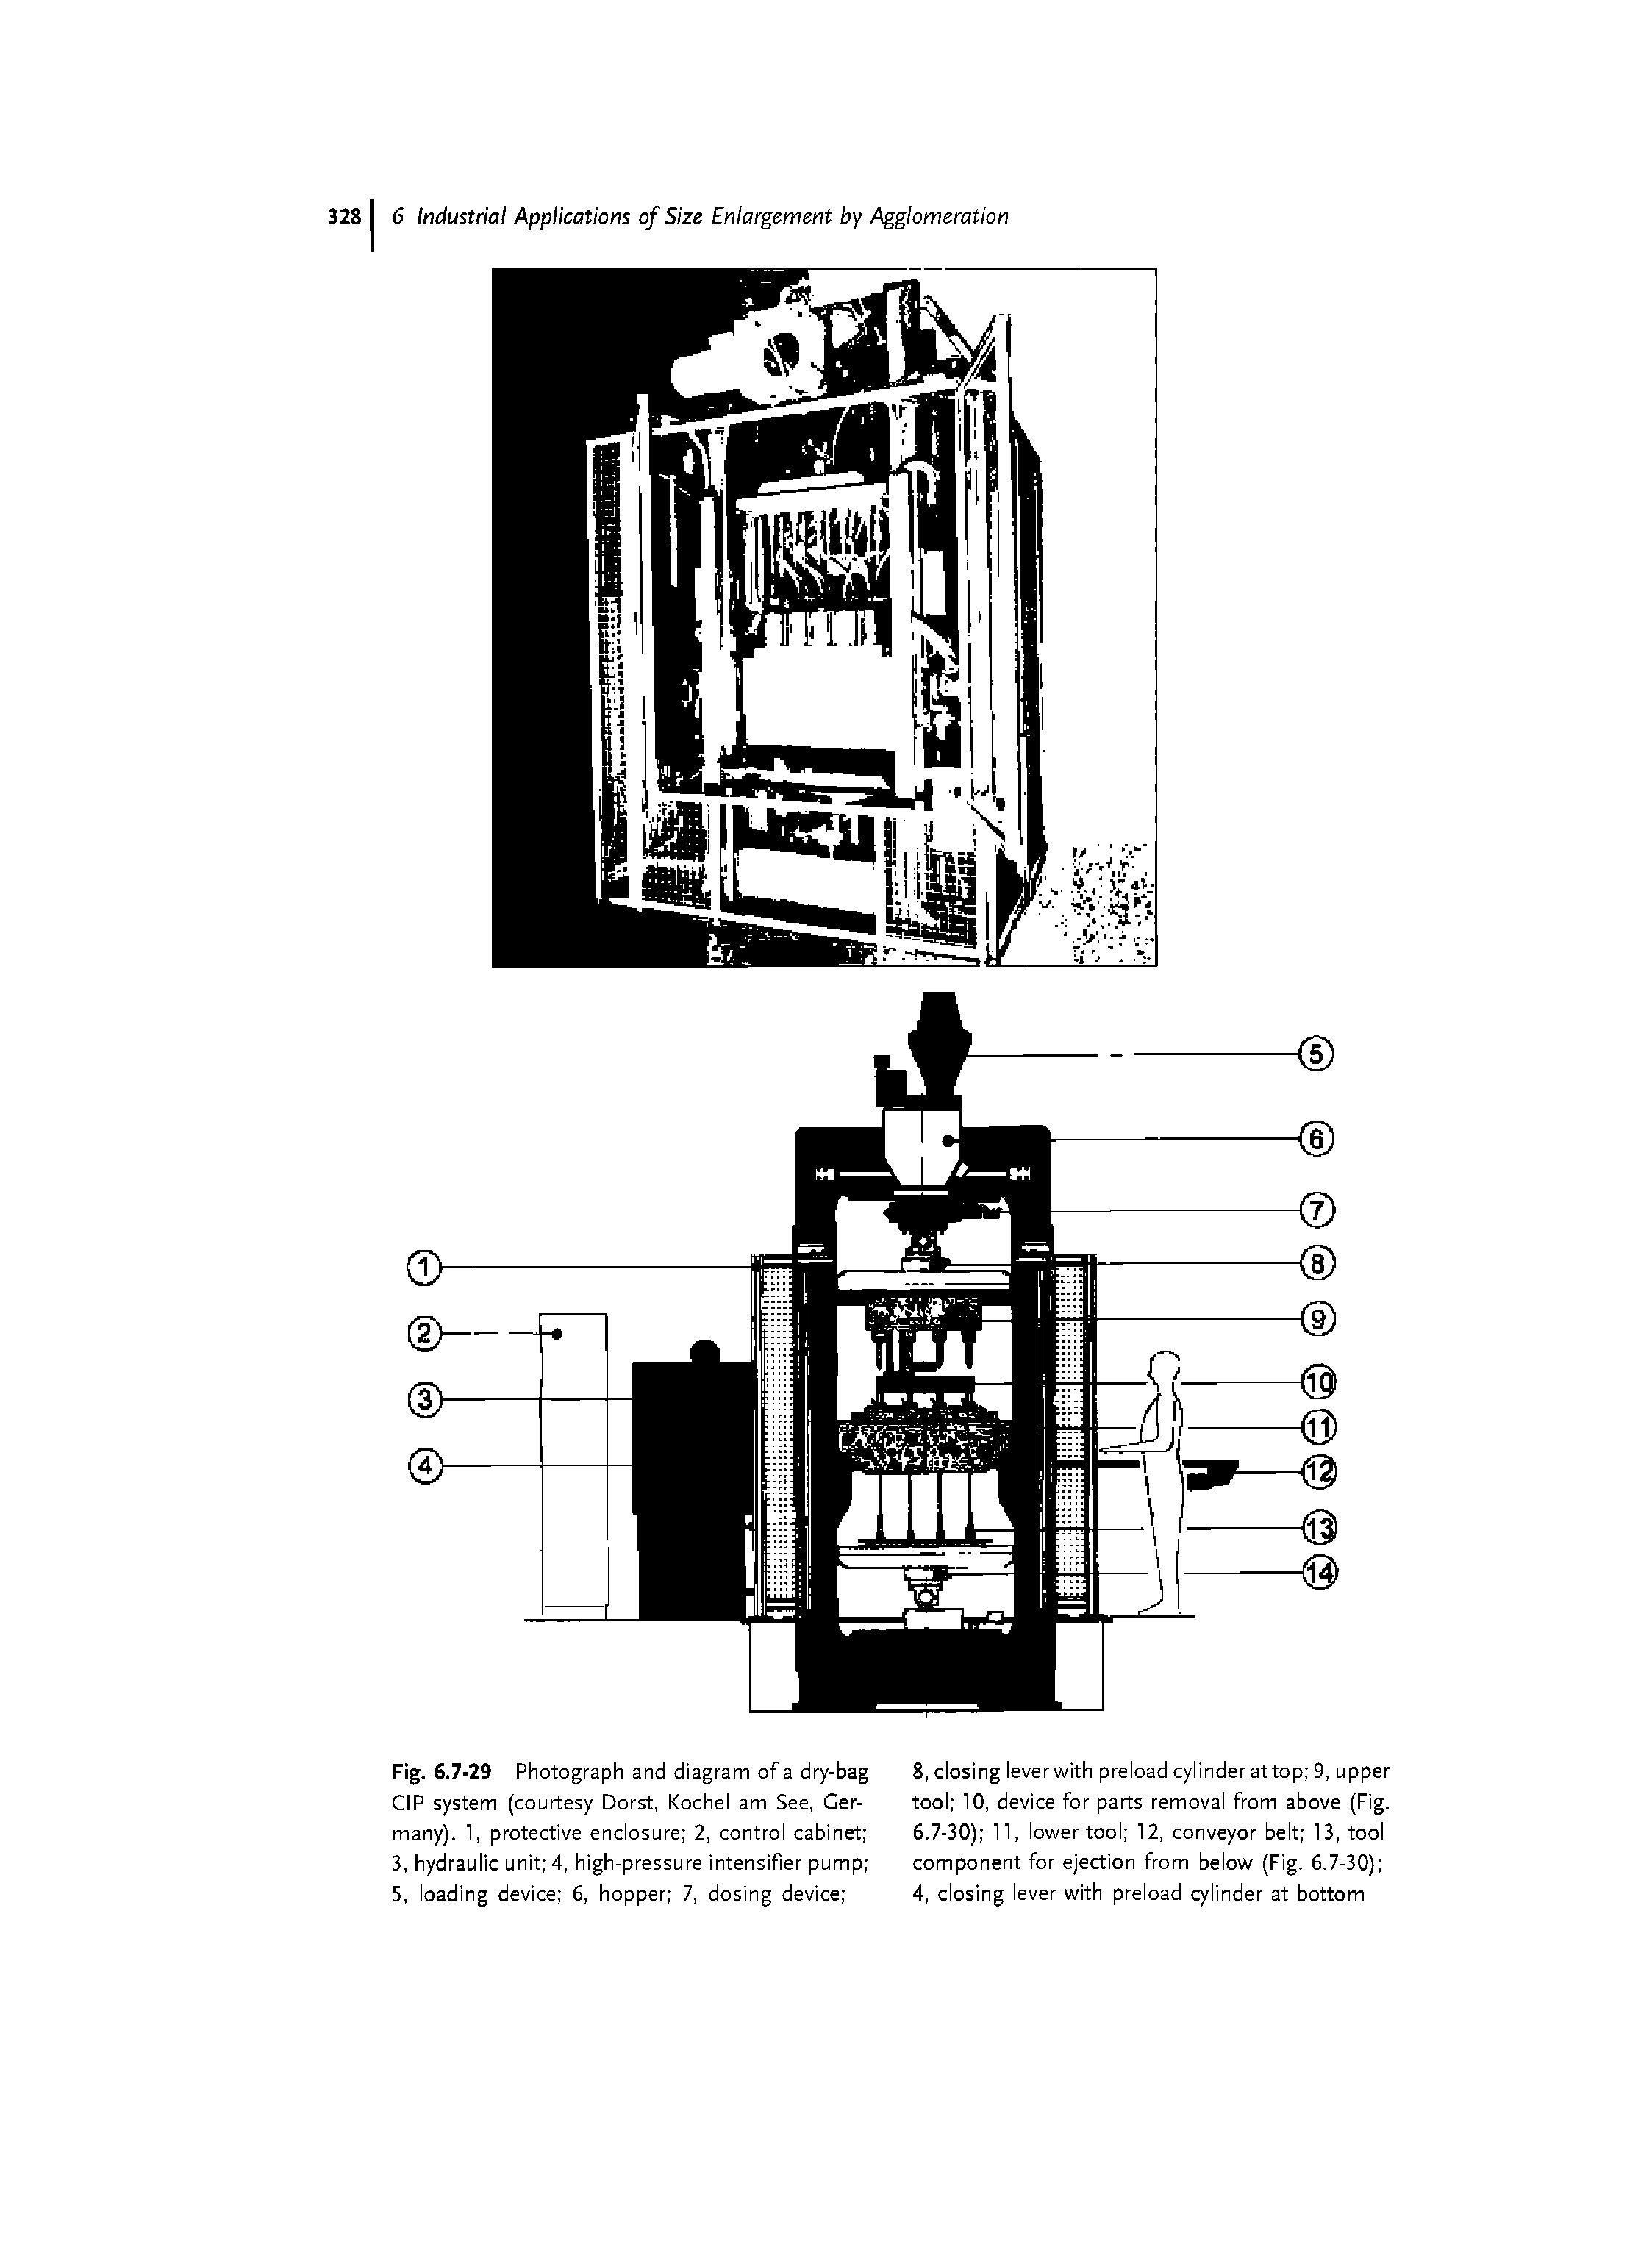 Fig. 6.7-29 Photograph and diagram of a dry-bag CIP system (courtesy Dorst, Kochel am See, Germany). 1, protective enclosure 2, control cabinet 3, hydraulic unit 4, high-pressure intensifier pump 5, loading device 6, hopper 7, dosing device ...